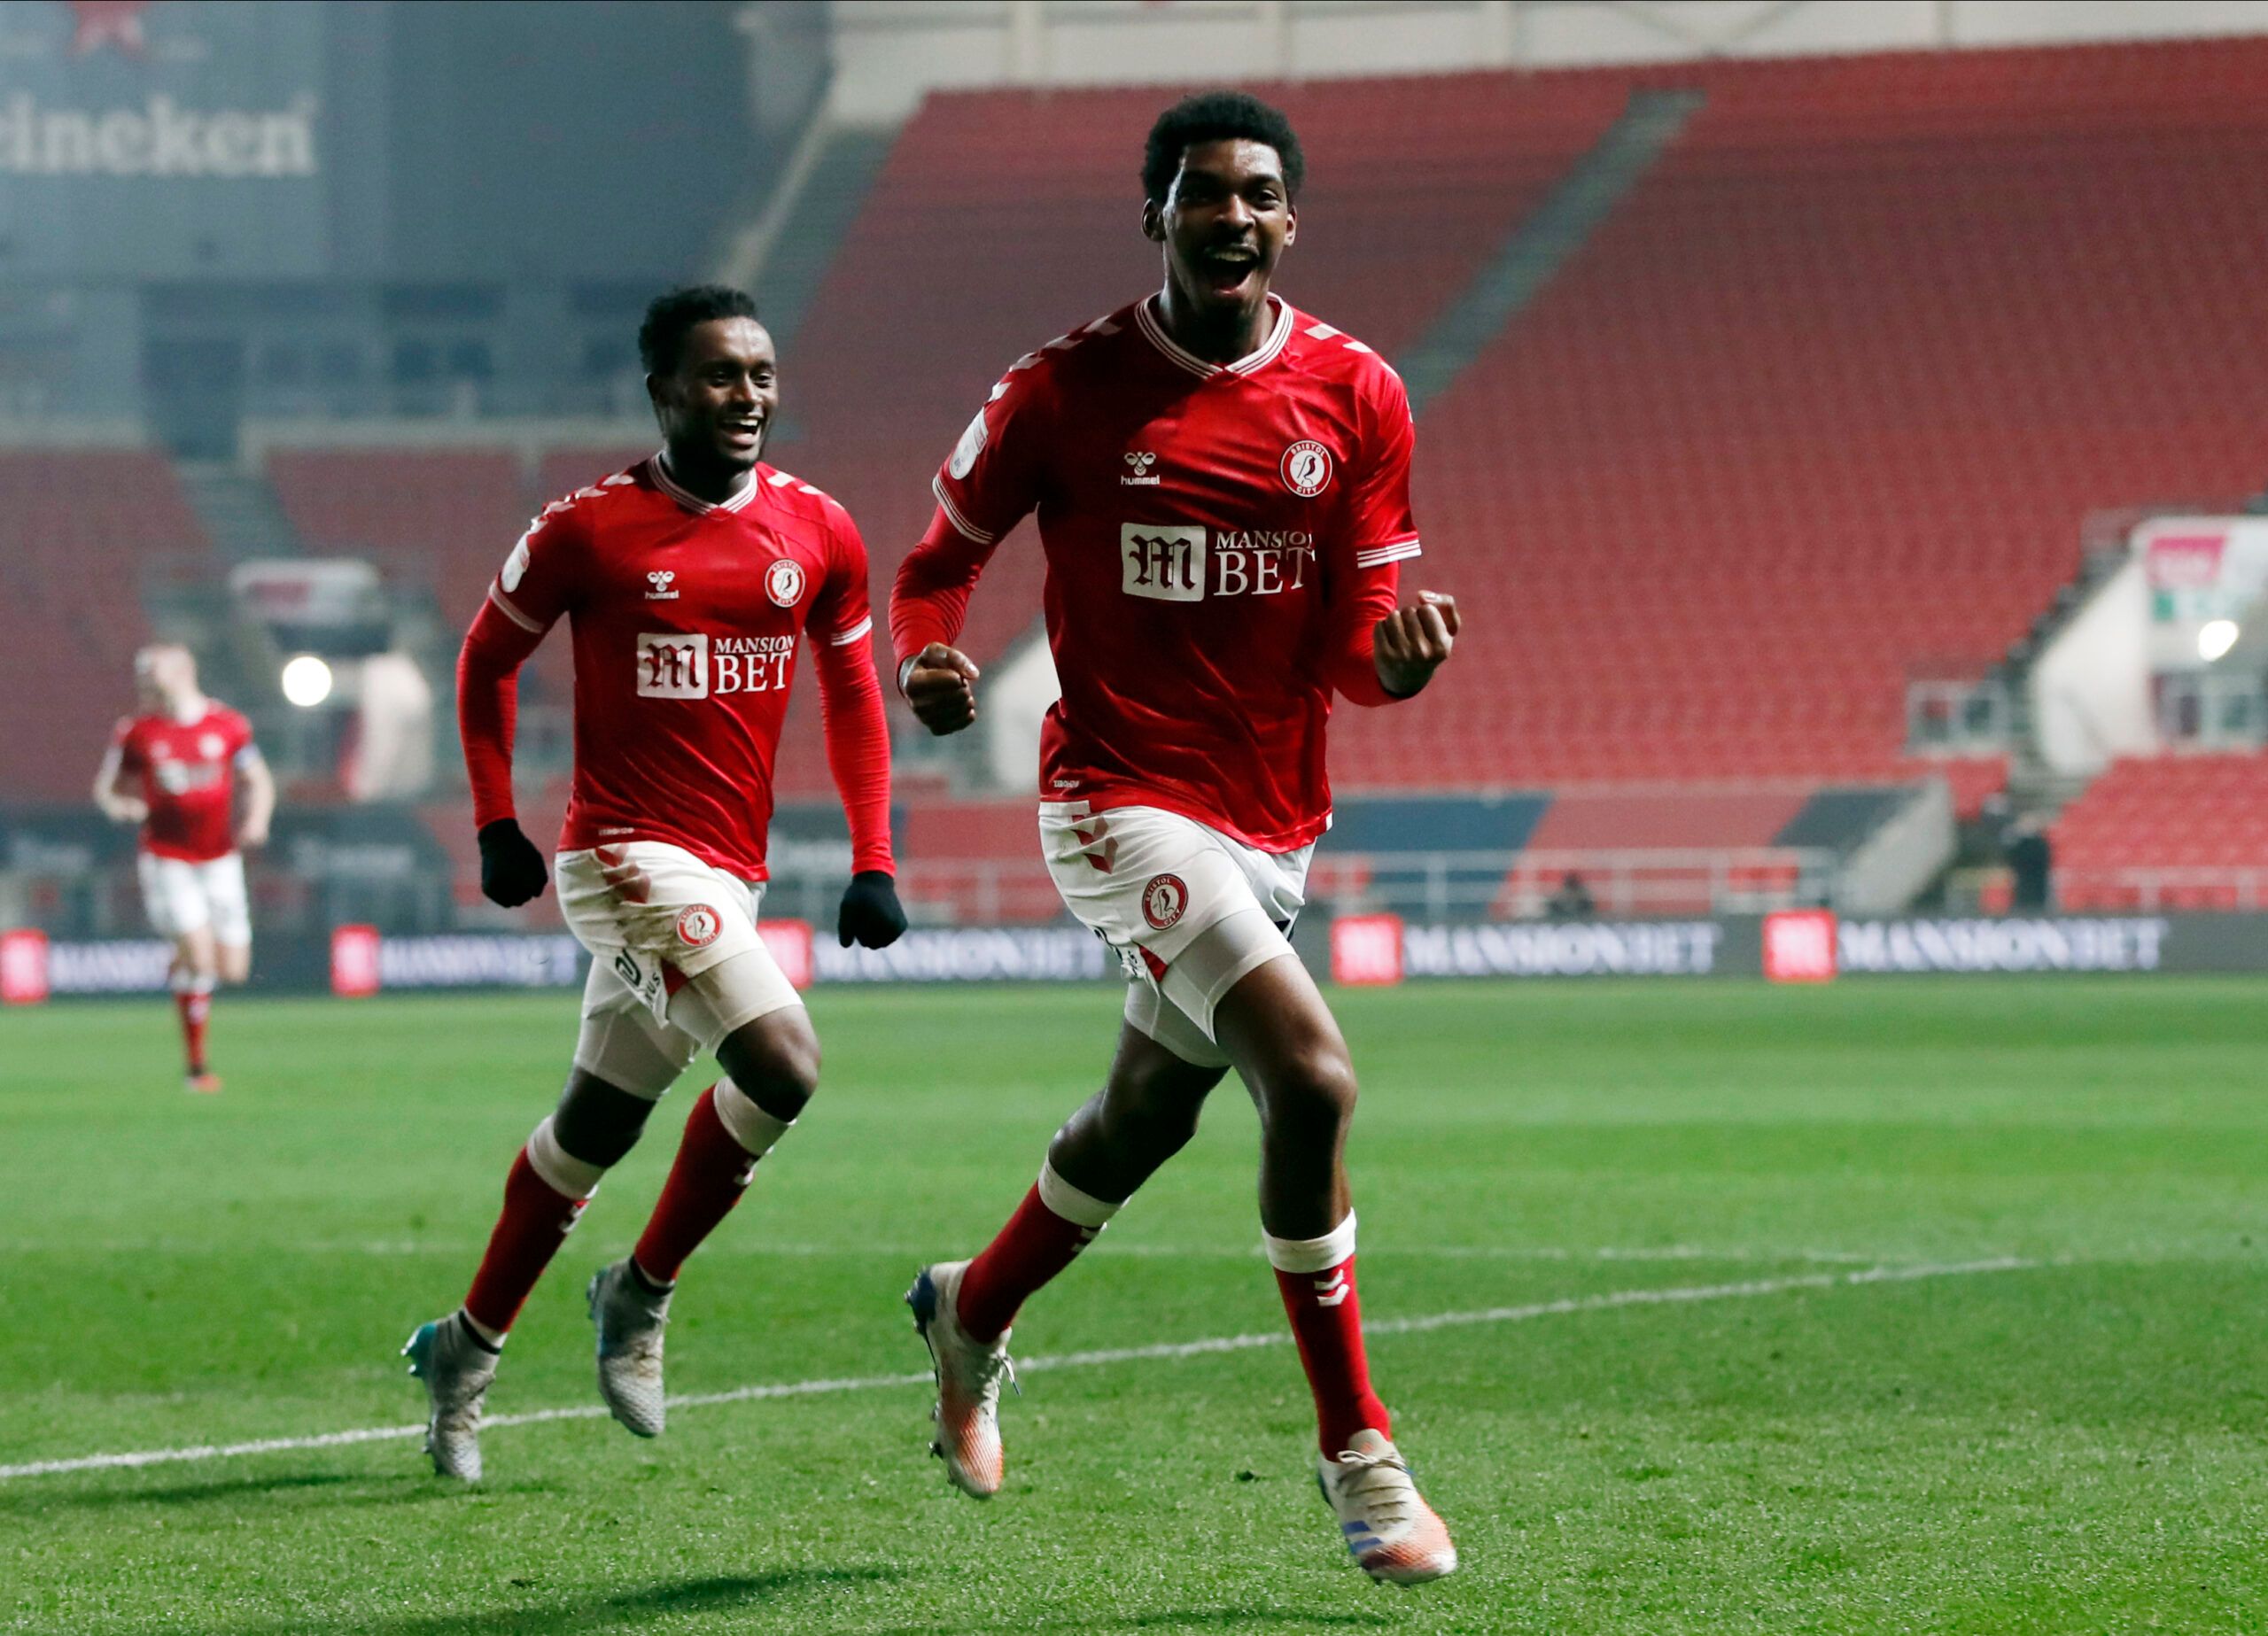 Soccer Football - Championship - Bristol City v AFC Bournemouth - Ashton Gate Stadium, Bristol, Britain - March 3, 2021 Bristol City's Tyreeq Bakinson celebrates scoring their first goal Action Images/Paul Childs EDITORIAL USE ONLY. No use with unauthorized audio, video, data, fixture lists, club/league logos or 'live' services. Online in-match use limited to 75 images, no video emulation. No use in betting, games or single club /league/player publications.  Please contact your account represent